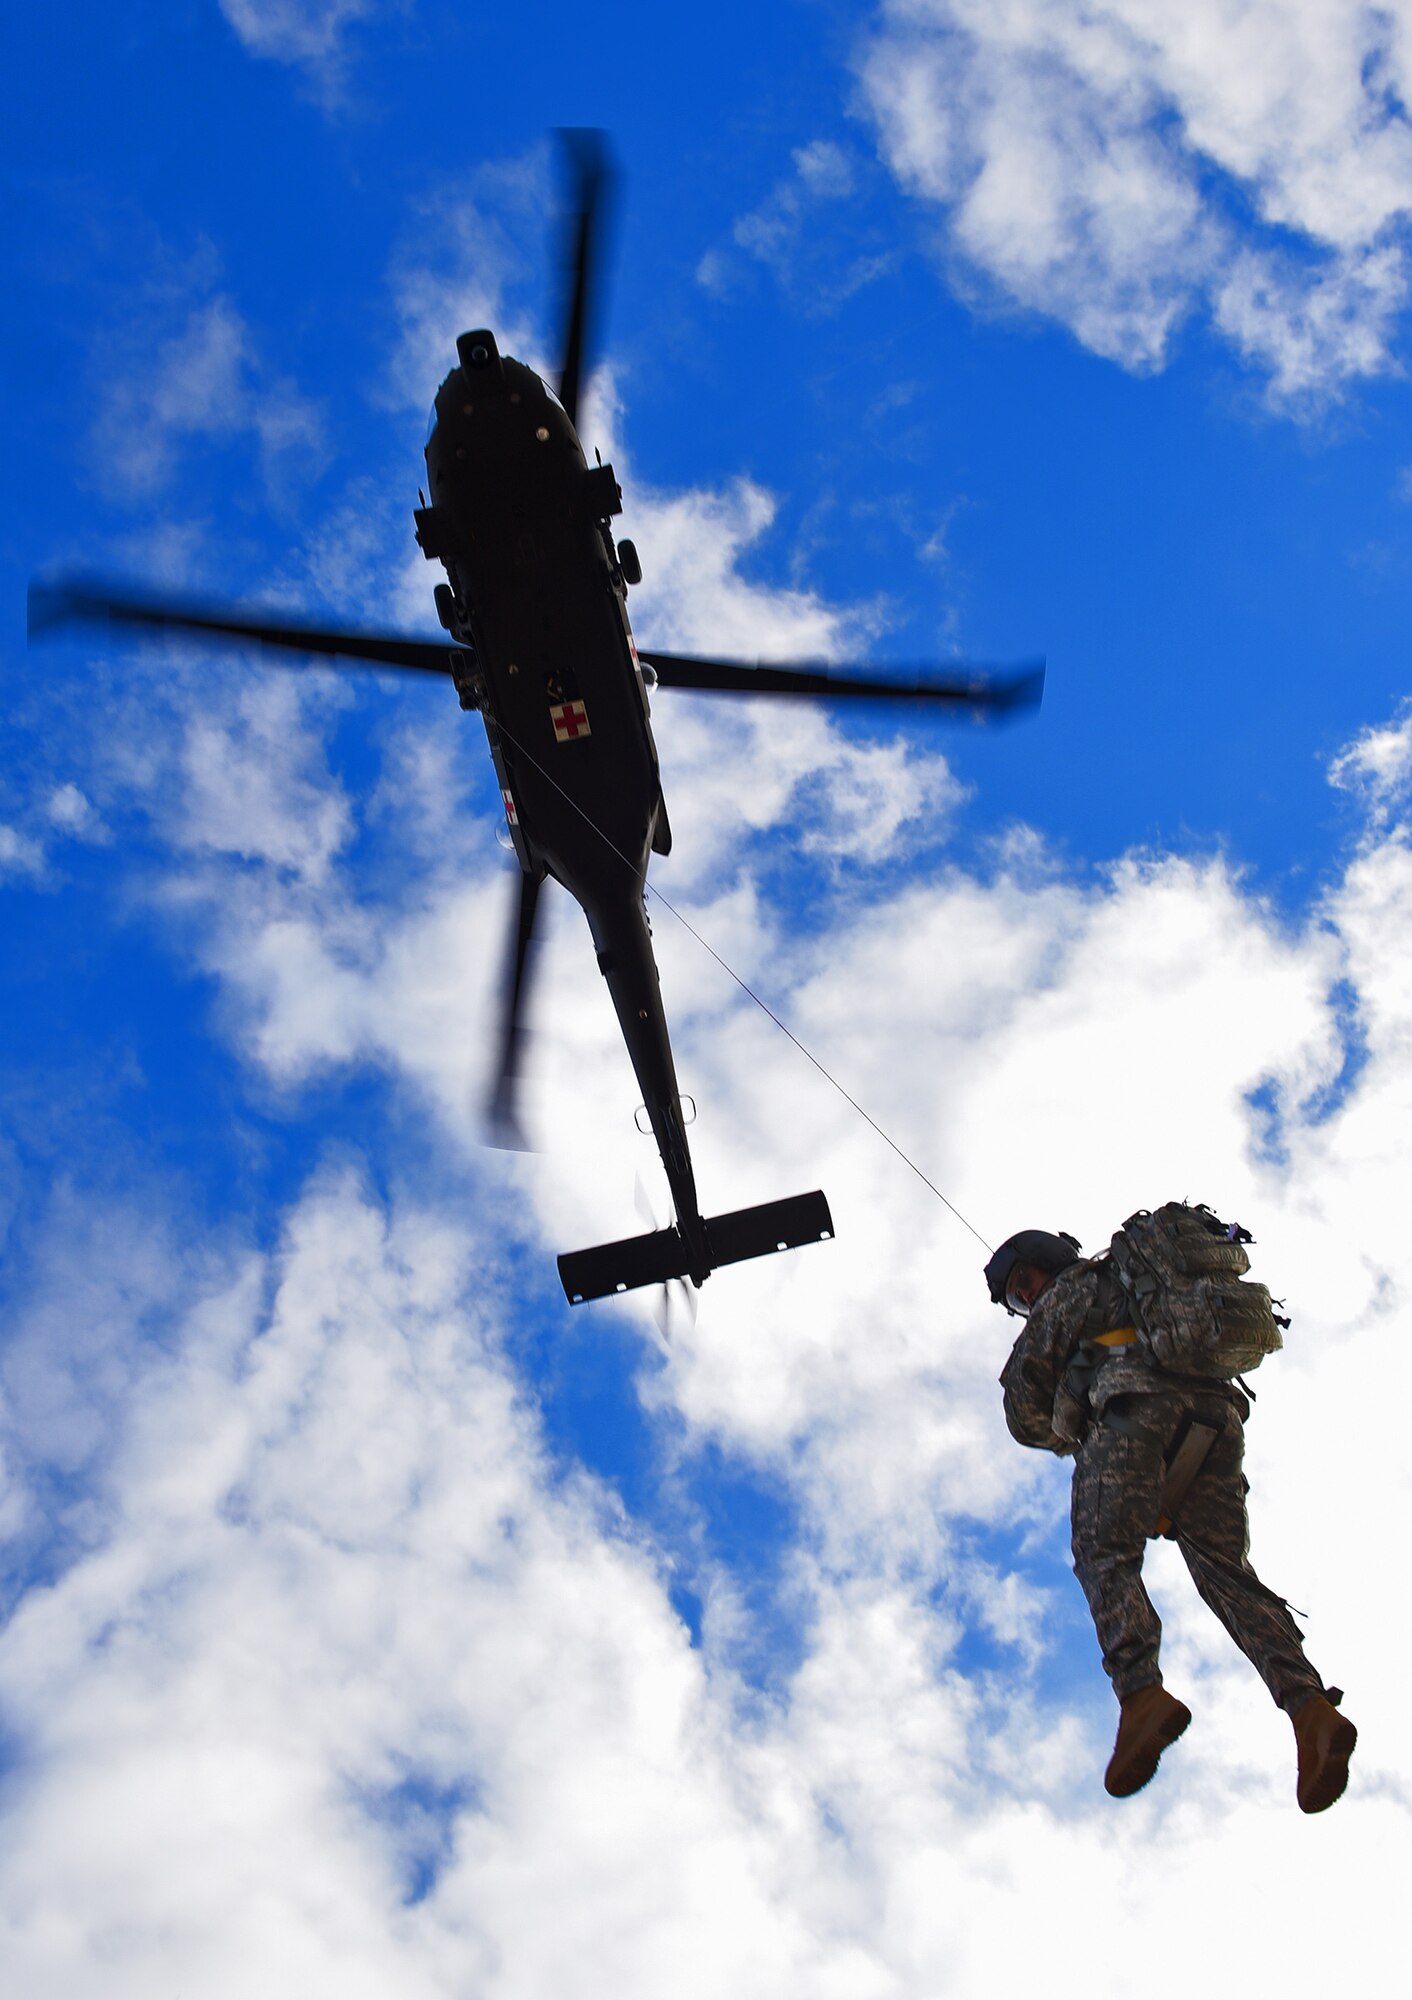 A soldier from the South Dakota National Guard’s Company C, 1st Battalion, 189th Aviation Regiment, descends from an UH60 Blackhawk helicopter during Exercise Combat Raider 1701 near Belle Fourche, S.D., Nov. 16, 2016. The exercise simulated rescuing two injured pilots that ejected from their aircraft in hostile territory. (U.S. Air Force photo by Airman 1st Class James L. Miller)